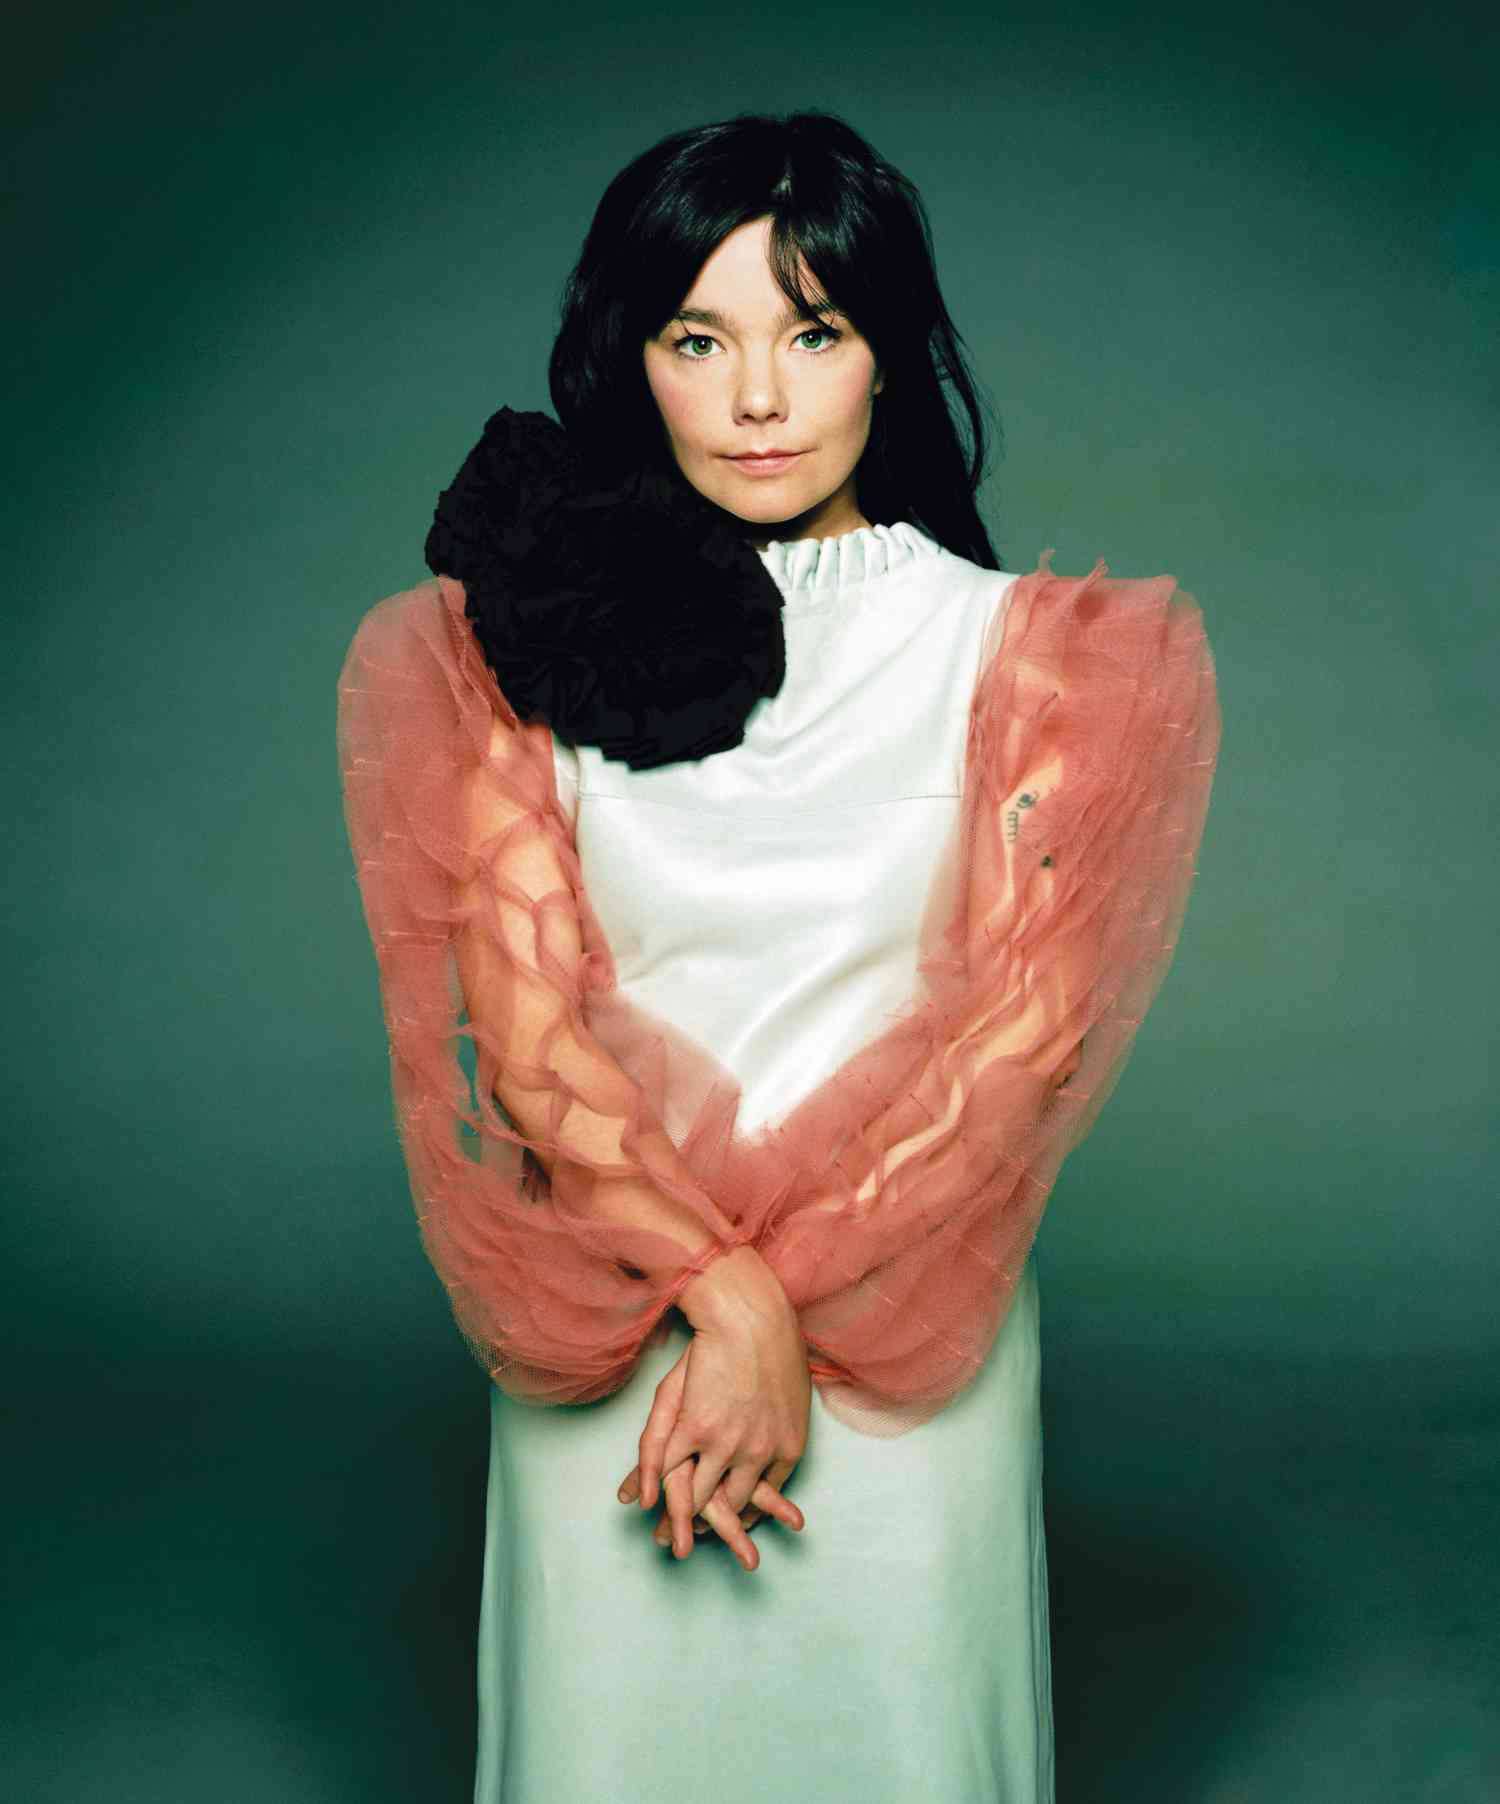 Iconic Image of bjork albums/songs cover by Warwick Saint